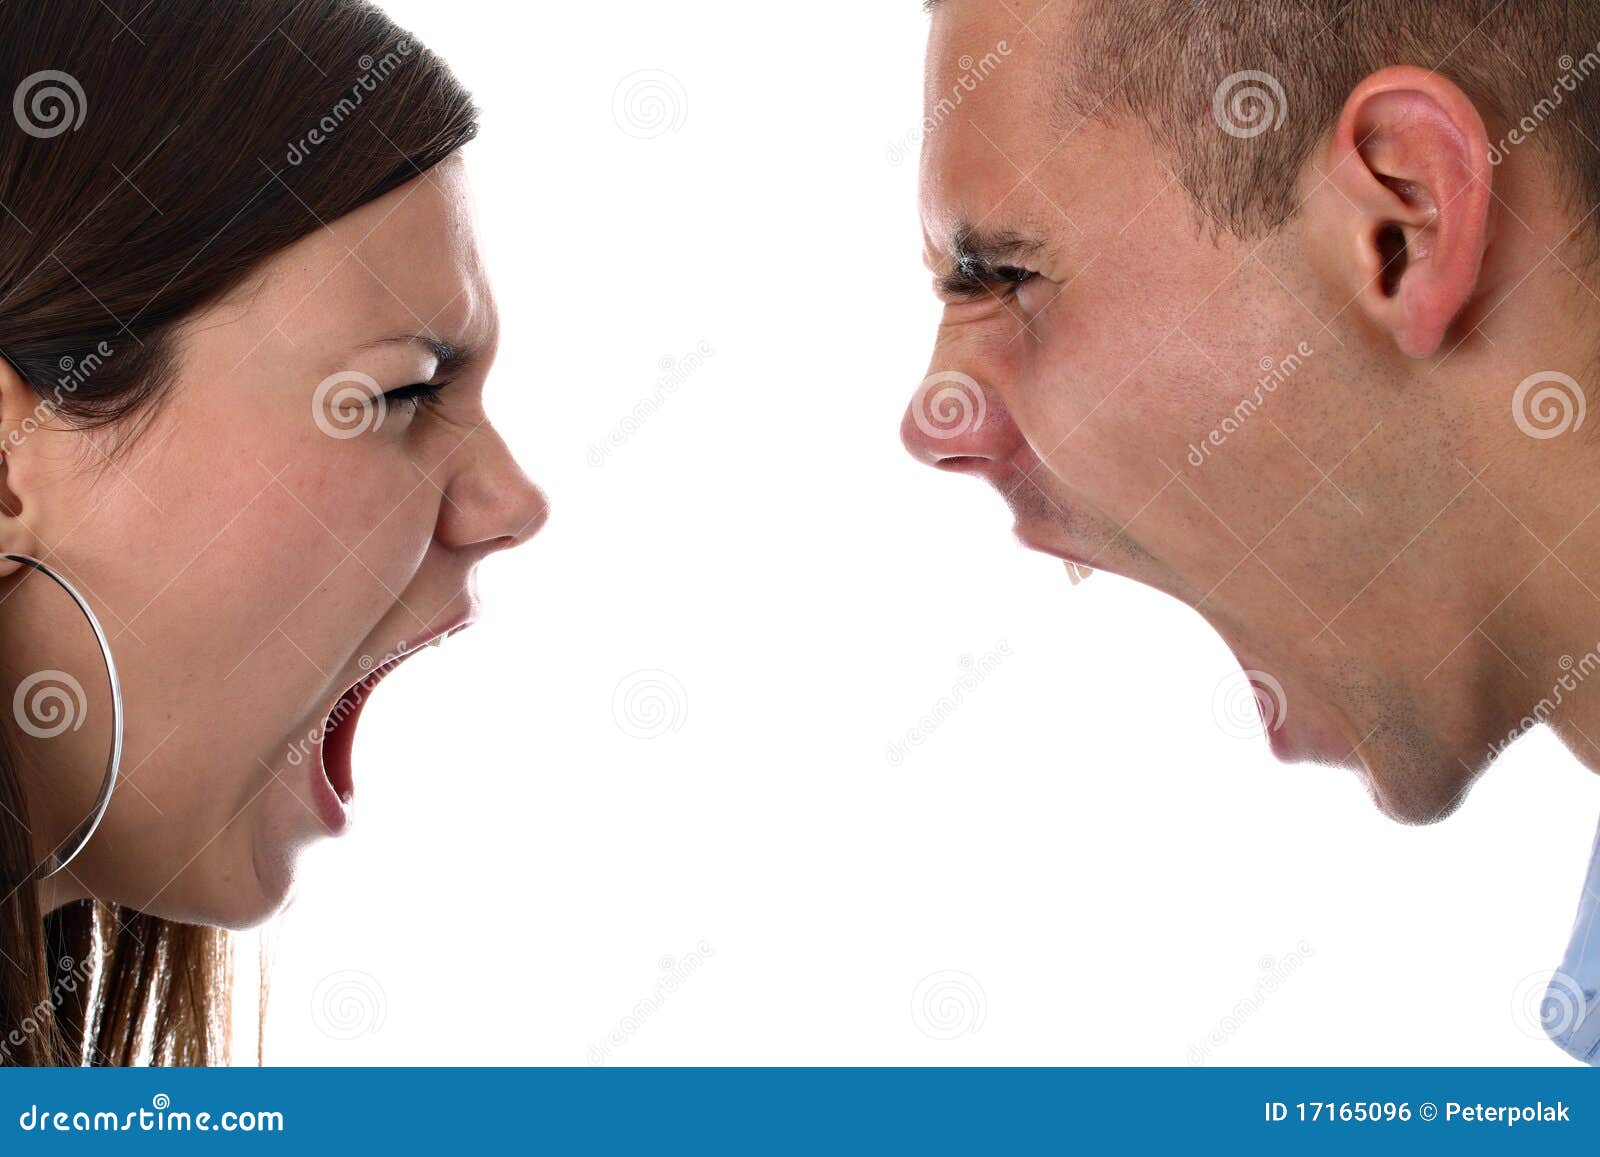 young couple yelling at each other 